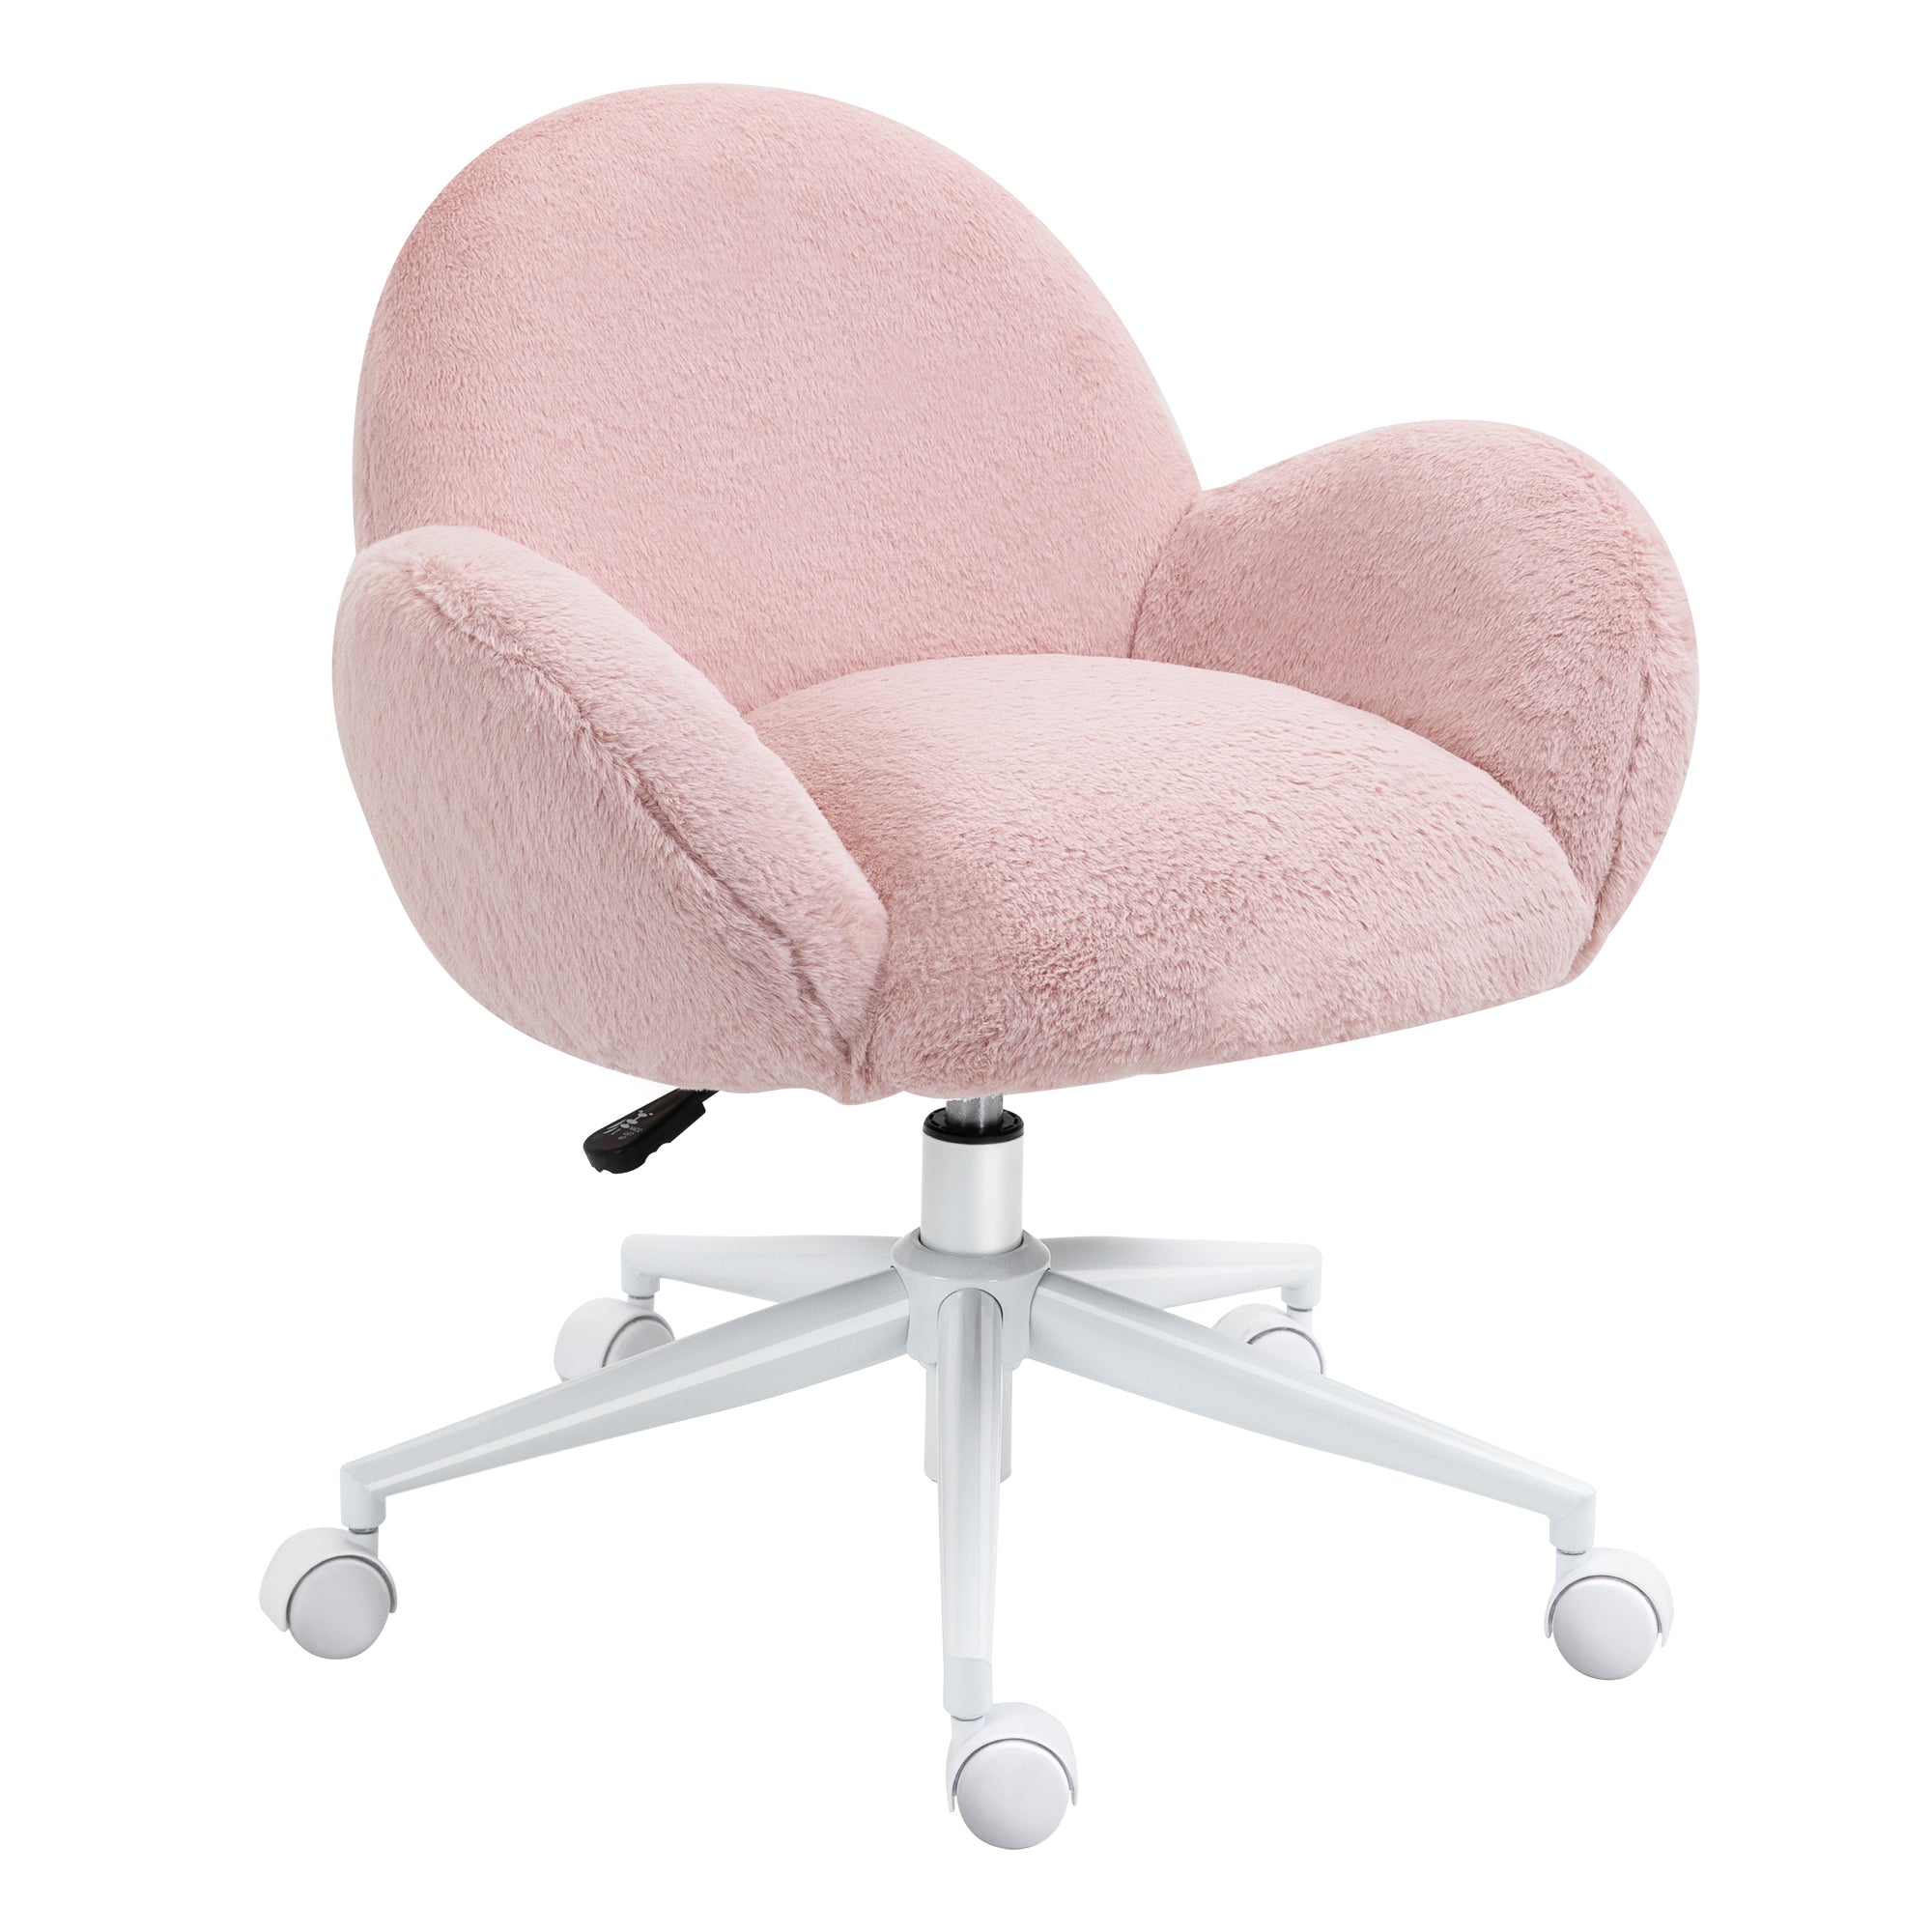 HOMCOM Fluffy Leisure Chair Office Chair with Backrest Armrest Wheels Pink  | TJ Hughes